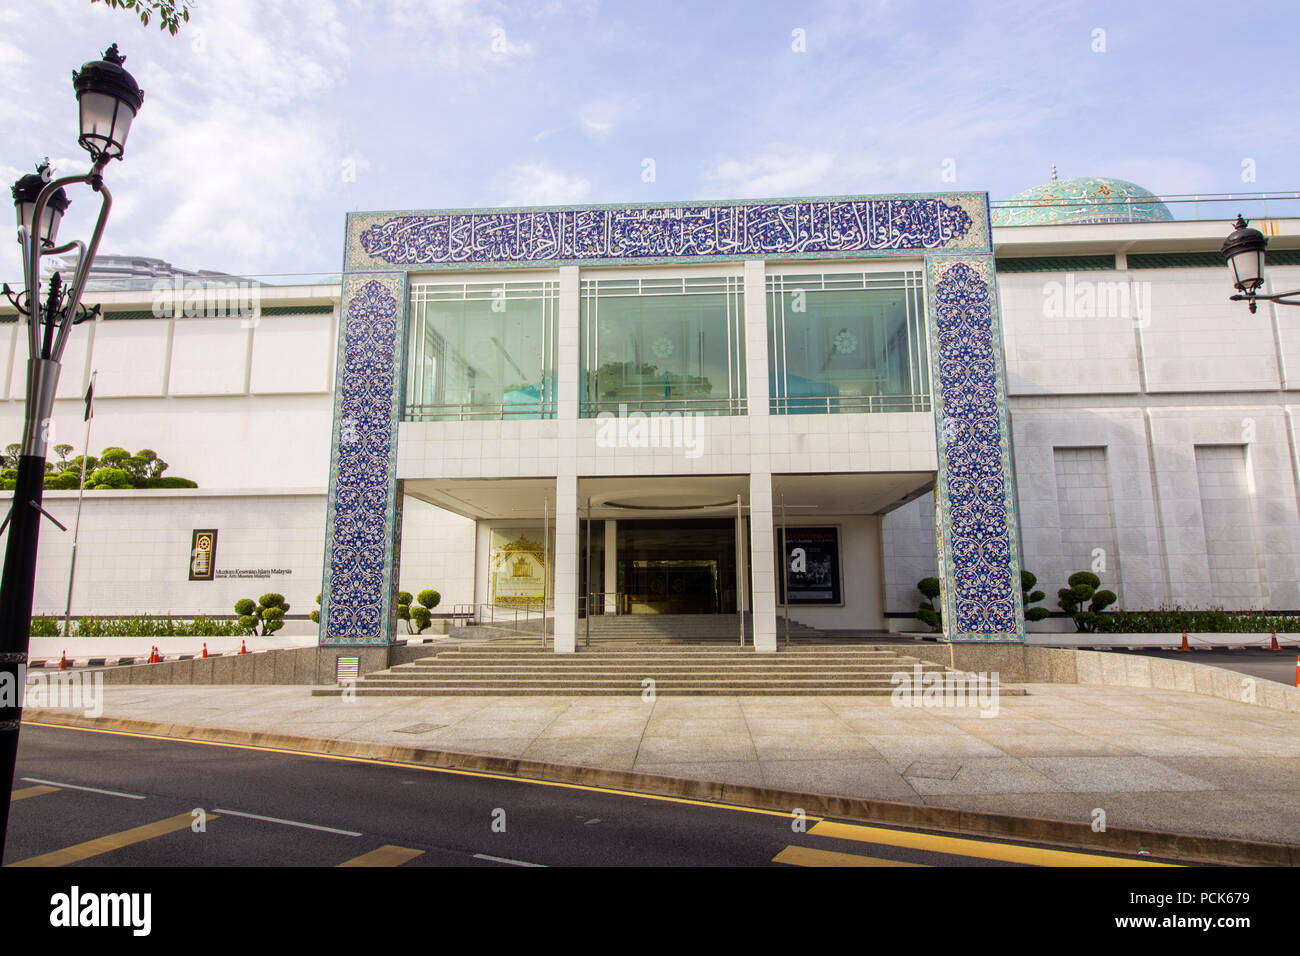 Islamic Arts Museum Malaysia in Kuala Lumper, is the largest museum of Islamic arts in South East Asia with more than seven thousands artifacts from t Stock Photo